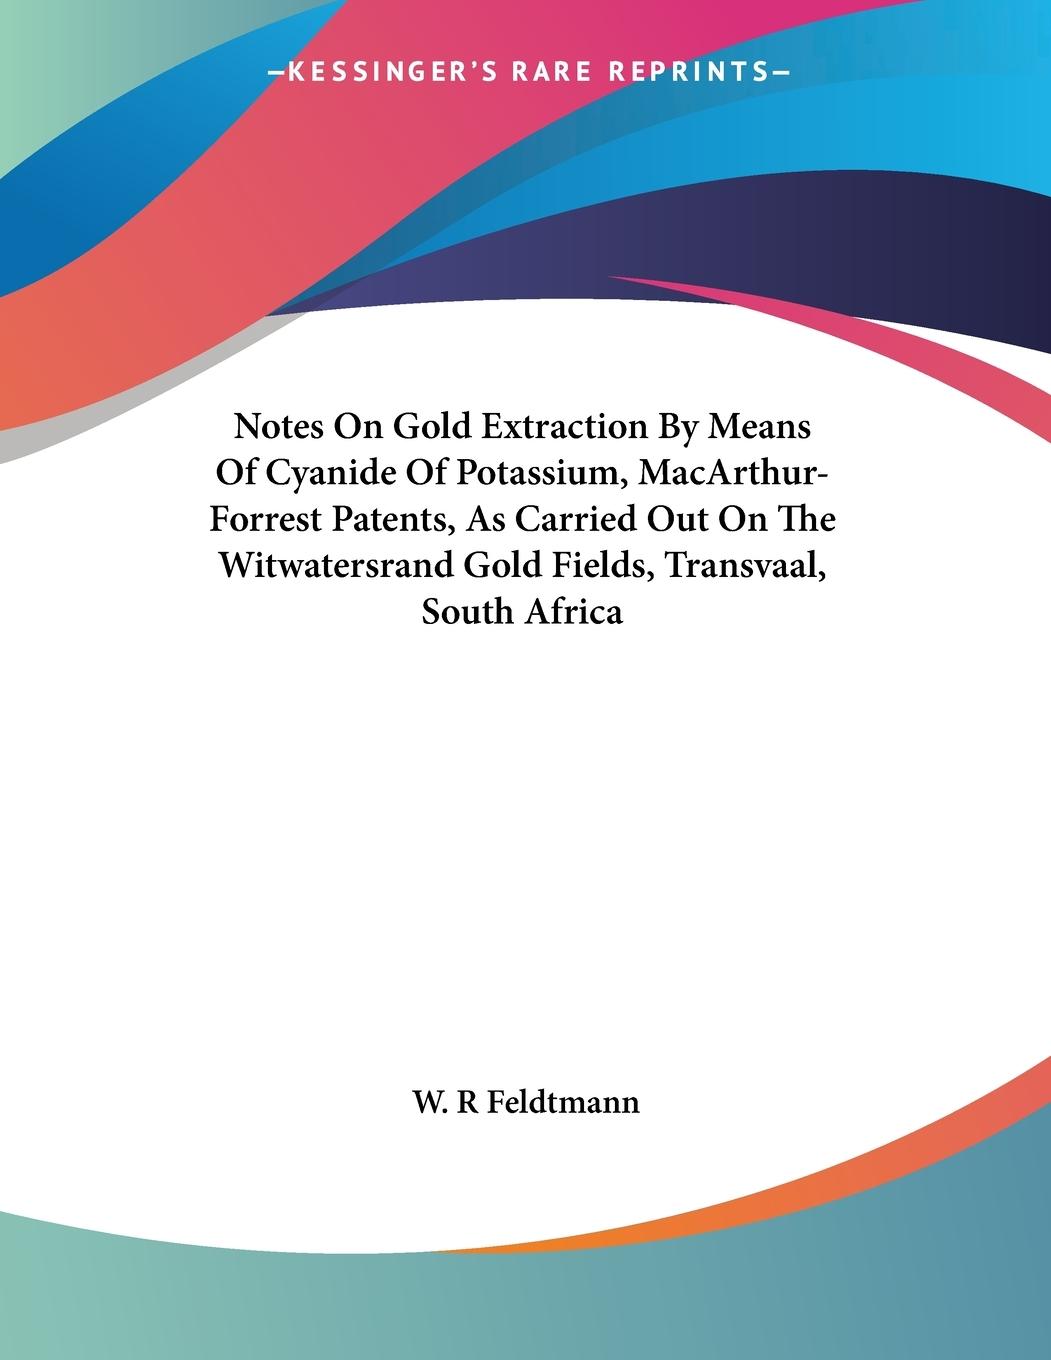 Notes On Gold Extraction By Means Of Cyanide Of Potassium, MacArthur-Forrest Patents, As Carried Out On The Witwatersrand Gold Fields, Transvaal, South Africa - Feldtmann, W. R